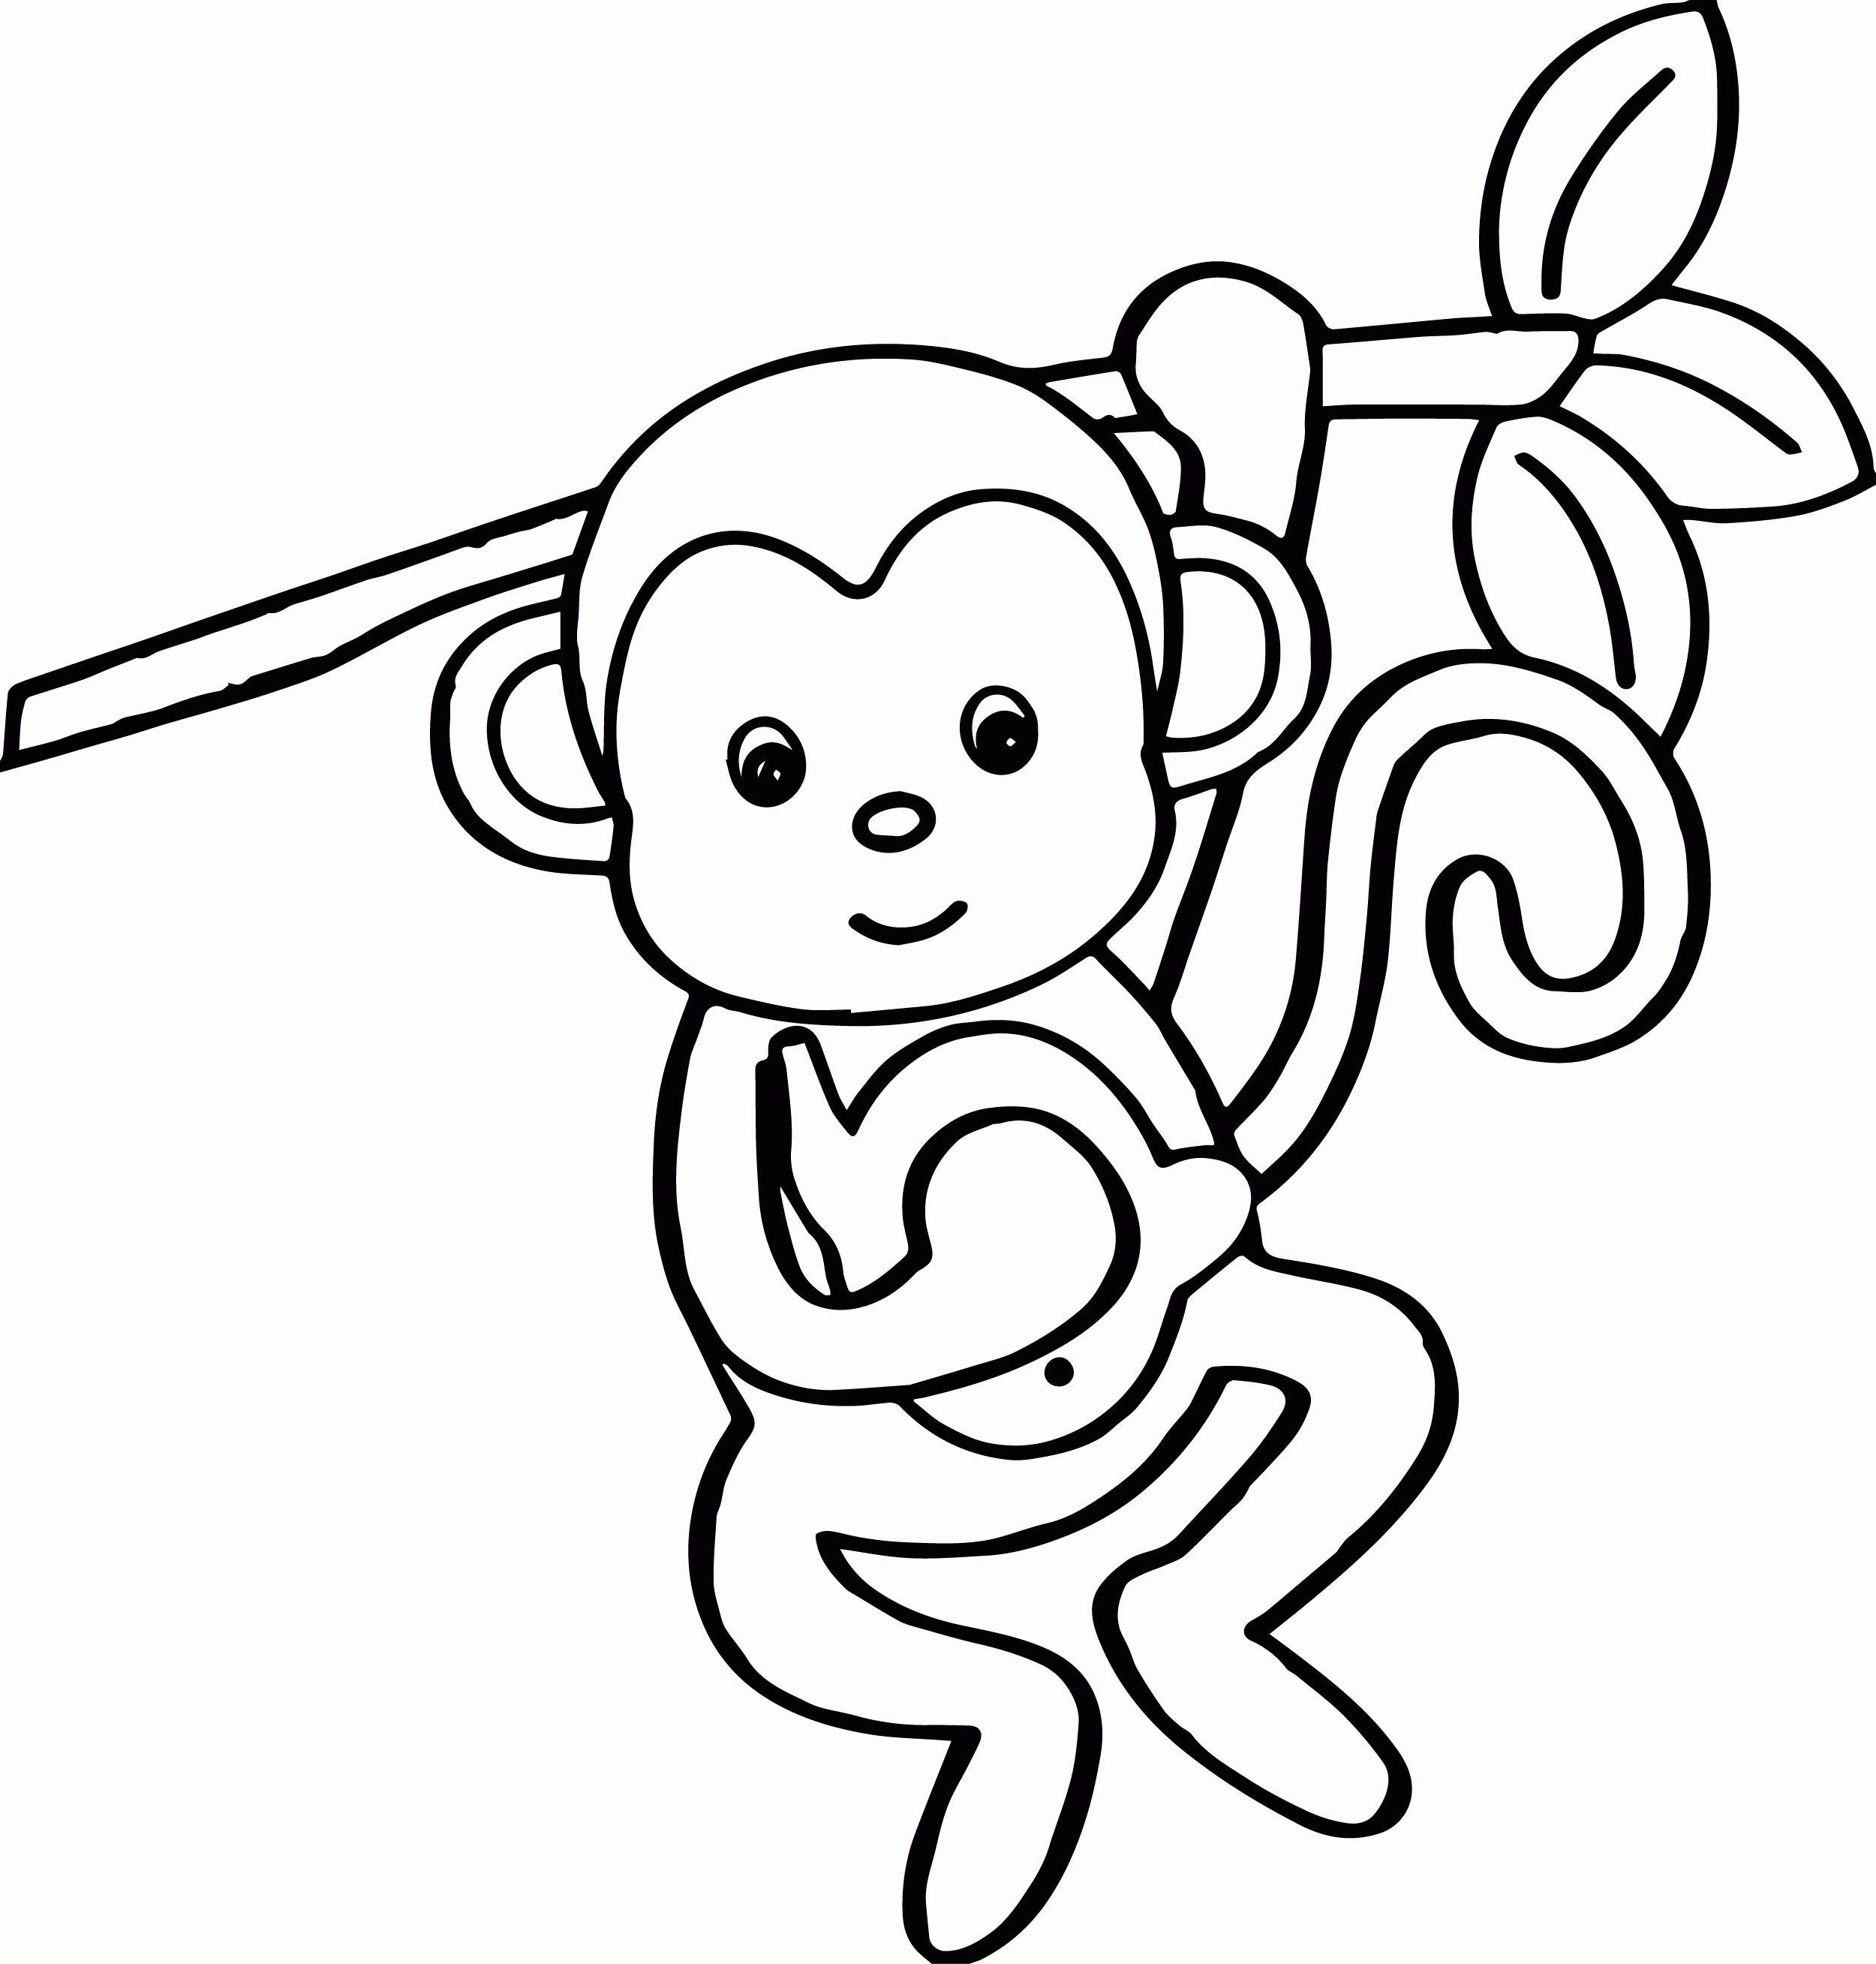 Cartoon Monkey - Coloring Pages for Kids and for Adults